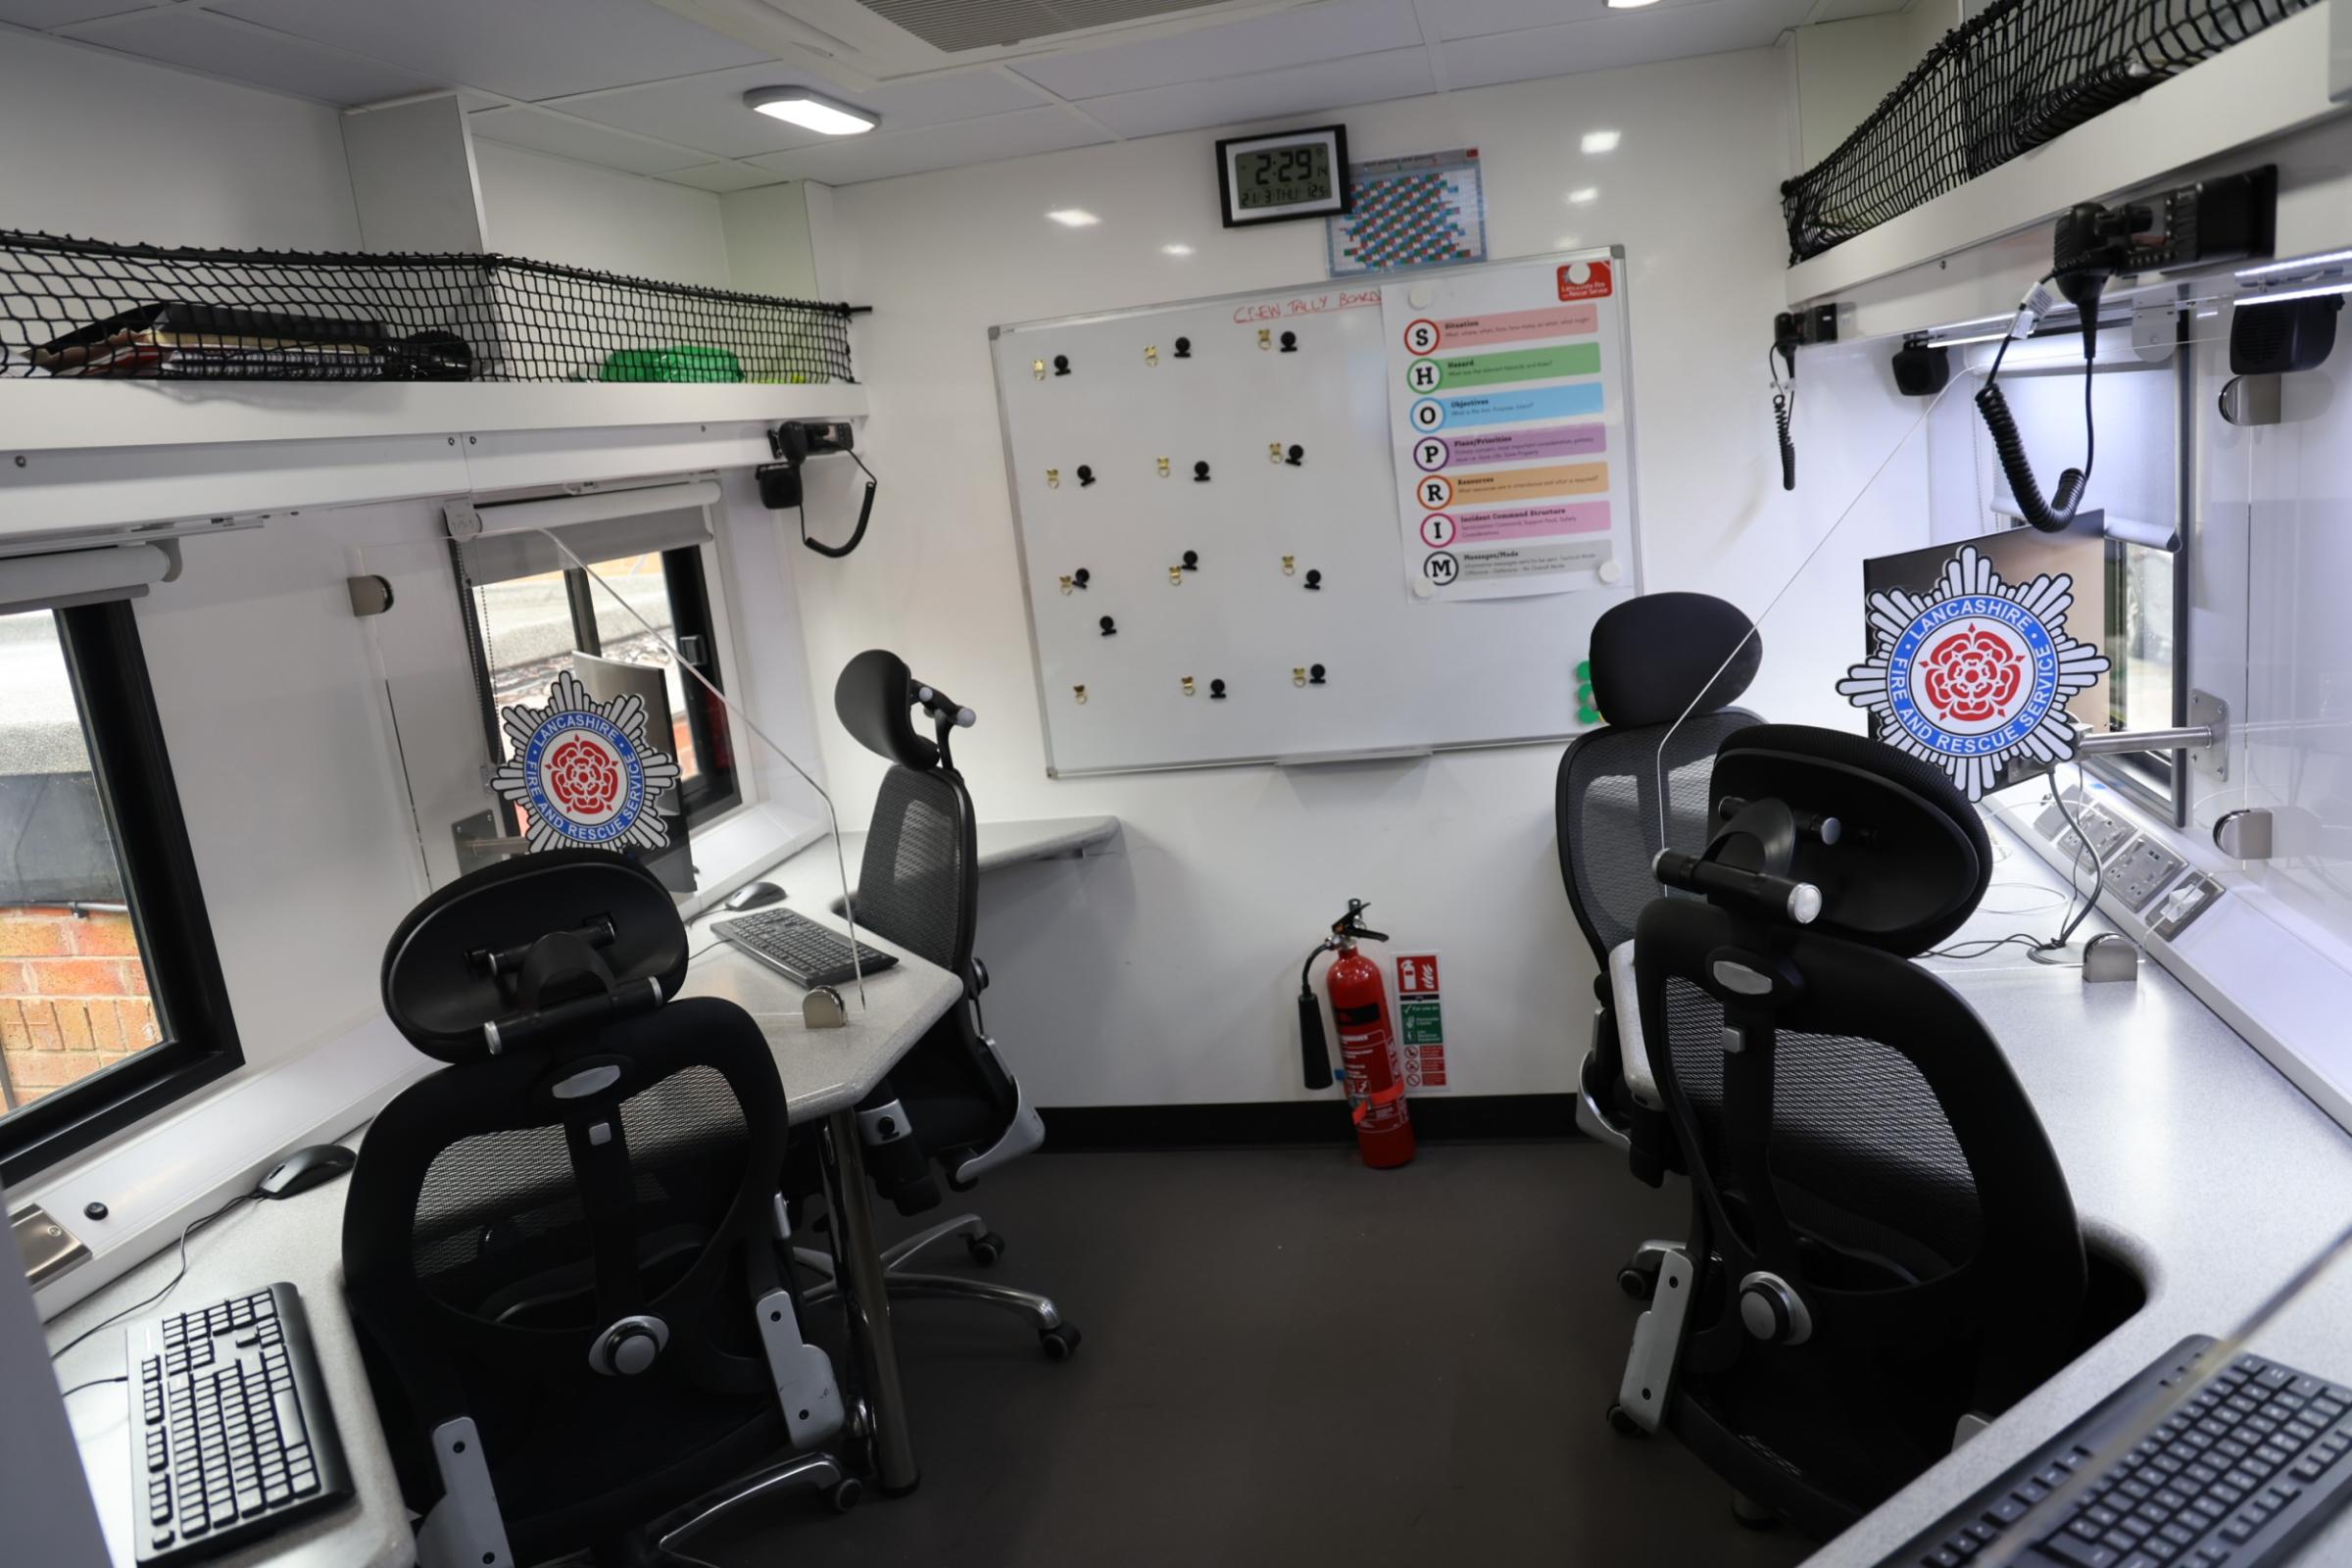 Inside the new command unit